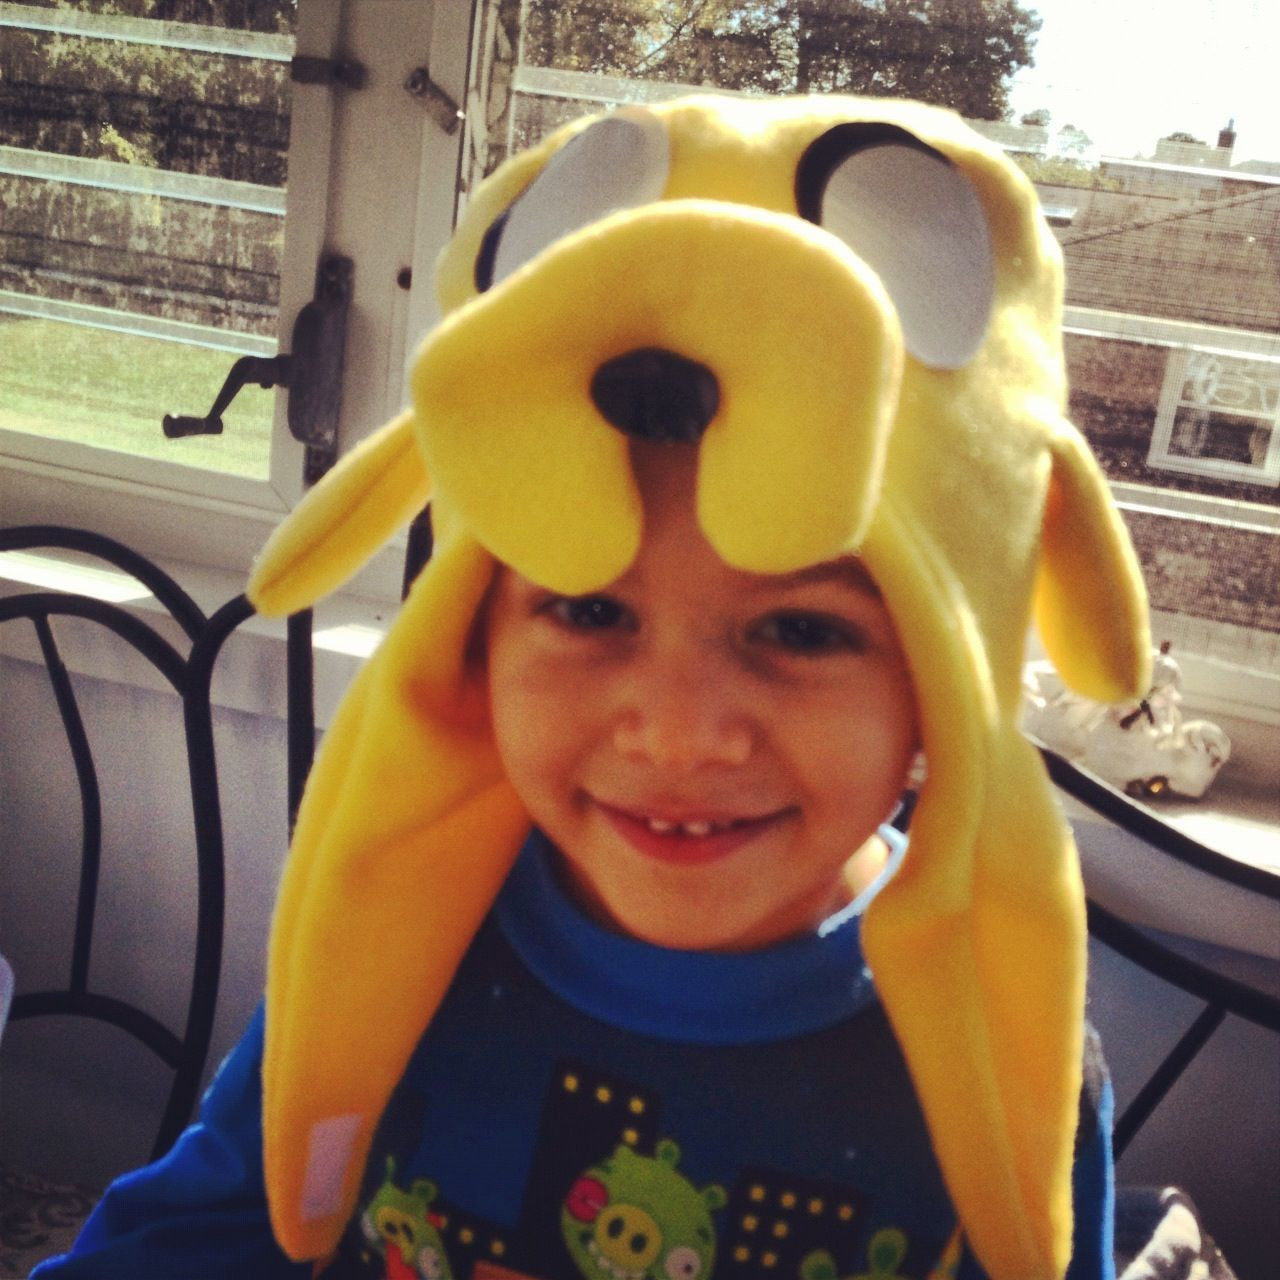 Jake The Dog Costume DIY
 Homemade Jake the dog hat from Adventuretime with Finn and